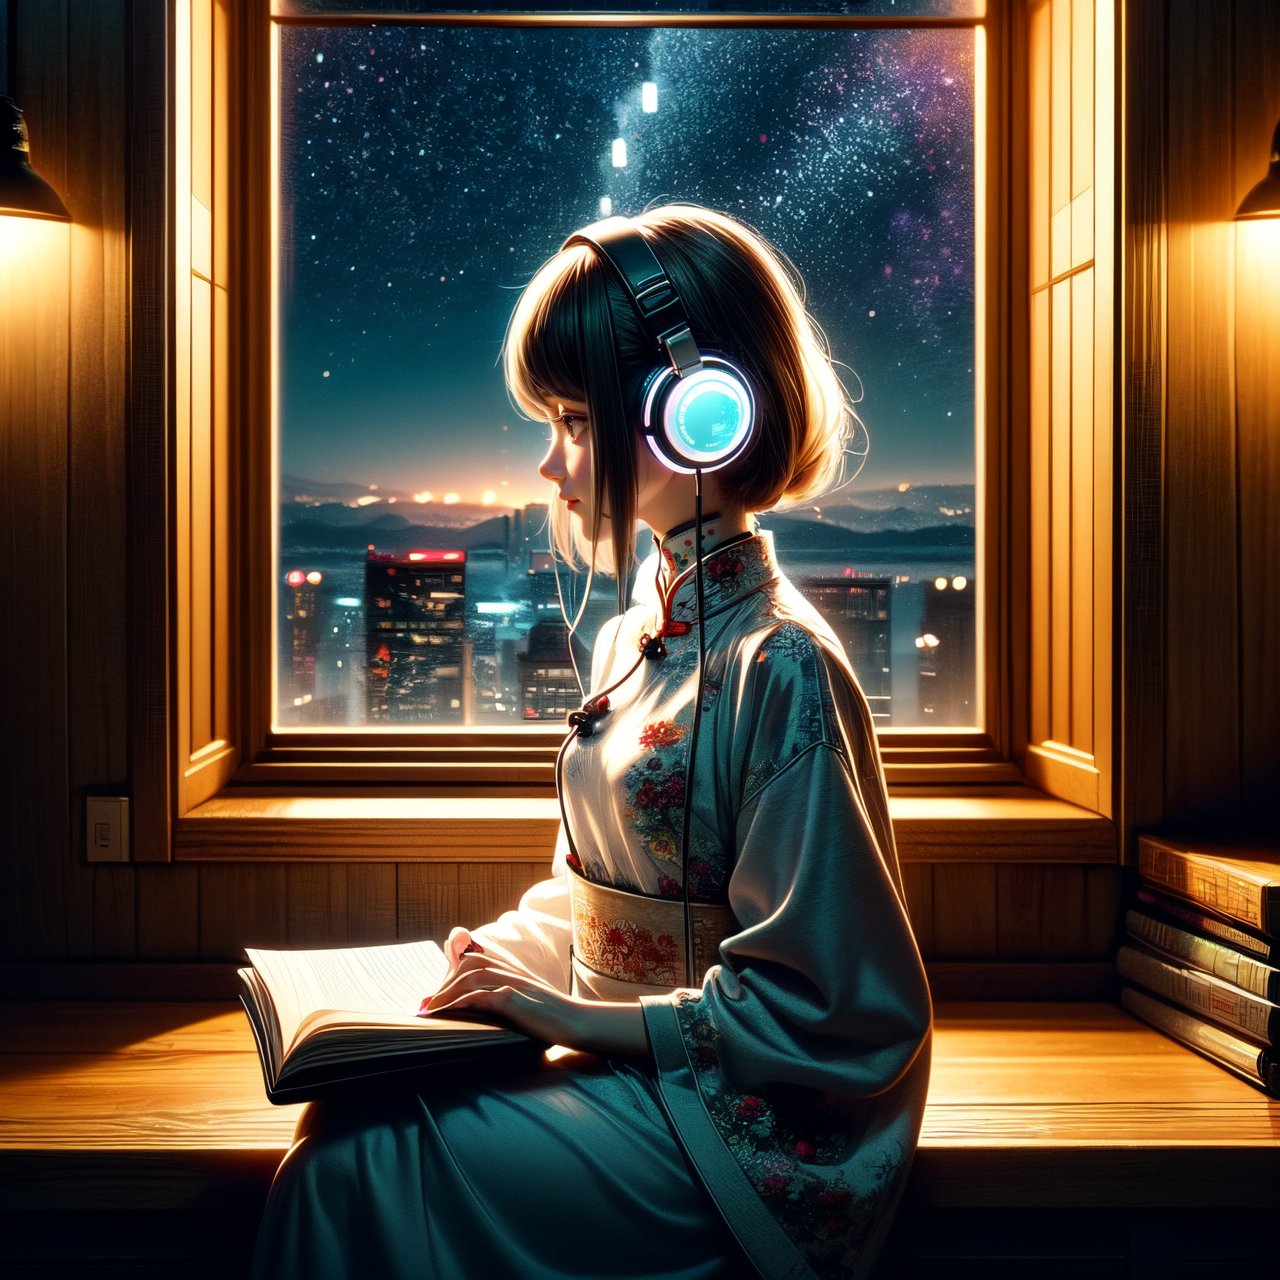 A cute LOFI music-themed anime-style girl wearing a winter cheongsam, leisurely reading a book by a window. She is wearing headphones and listening to music. The window offers a view of a vast night sky filled with stars and fireworks, set in a cyberpunk world. The image features a warm color palette, creating a cozy and inviting atmosphere. This scene combines traditional Chinese elements with a futuristic cyberpunk setting, capturing the essence of a serene winter night. perfectly suited for a LOFI music background.